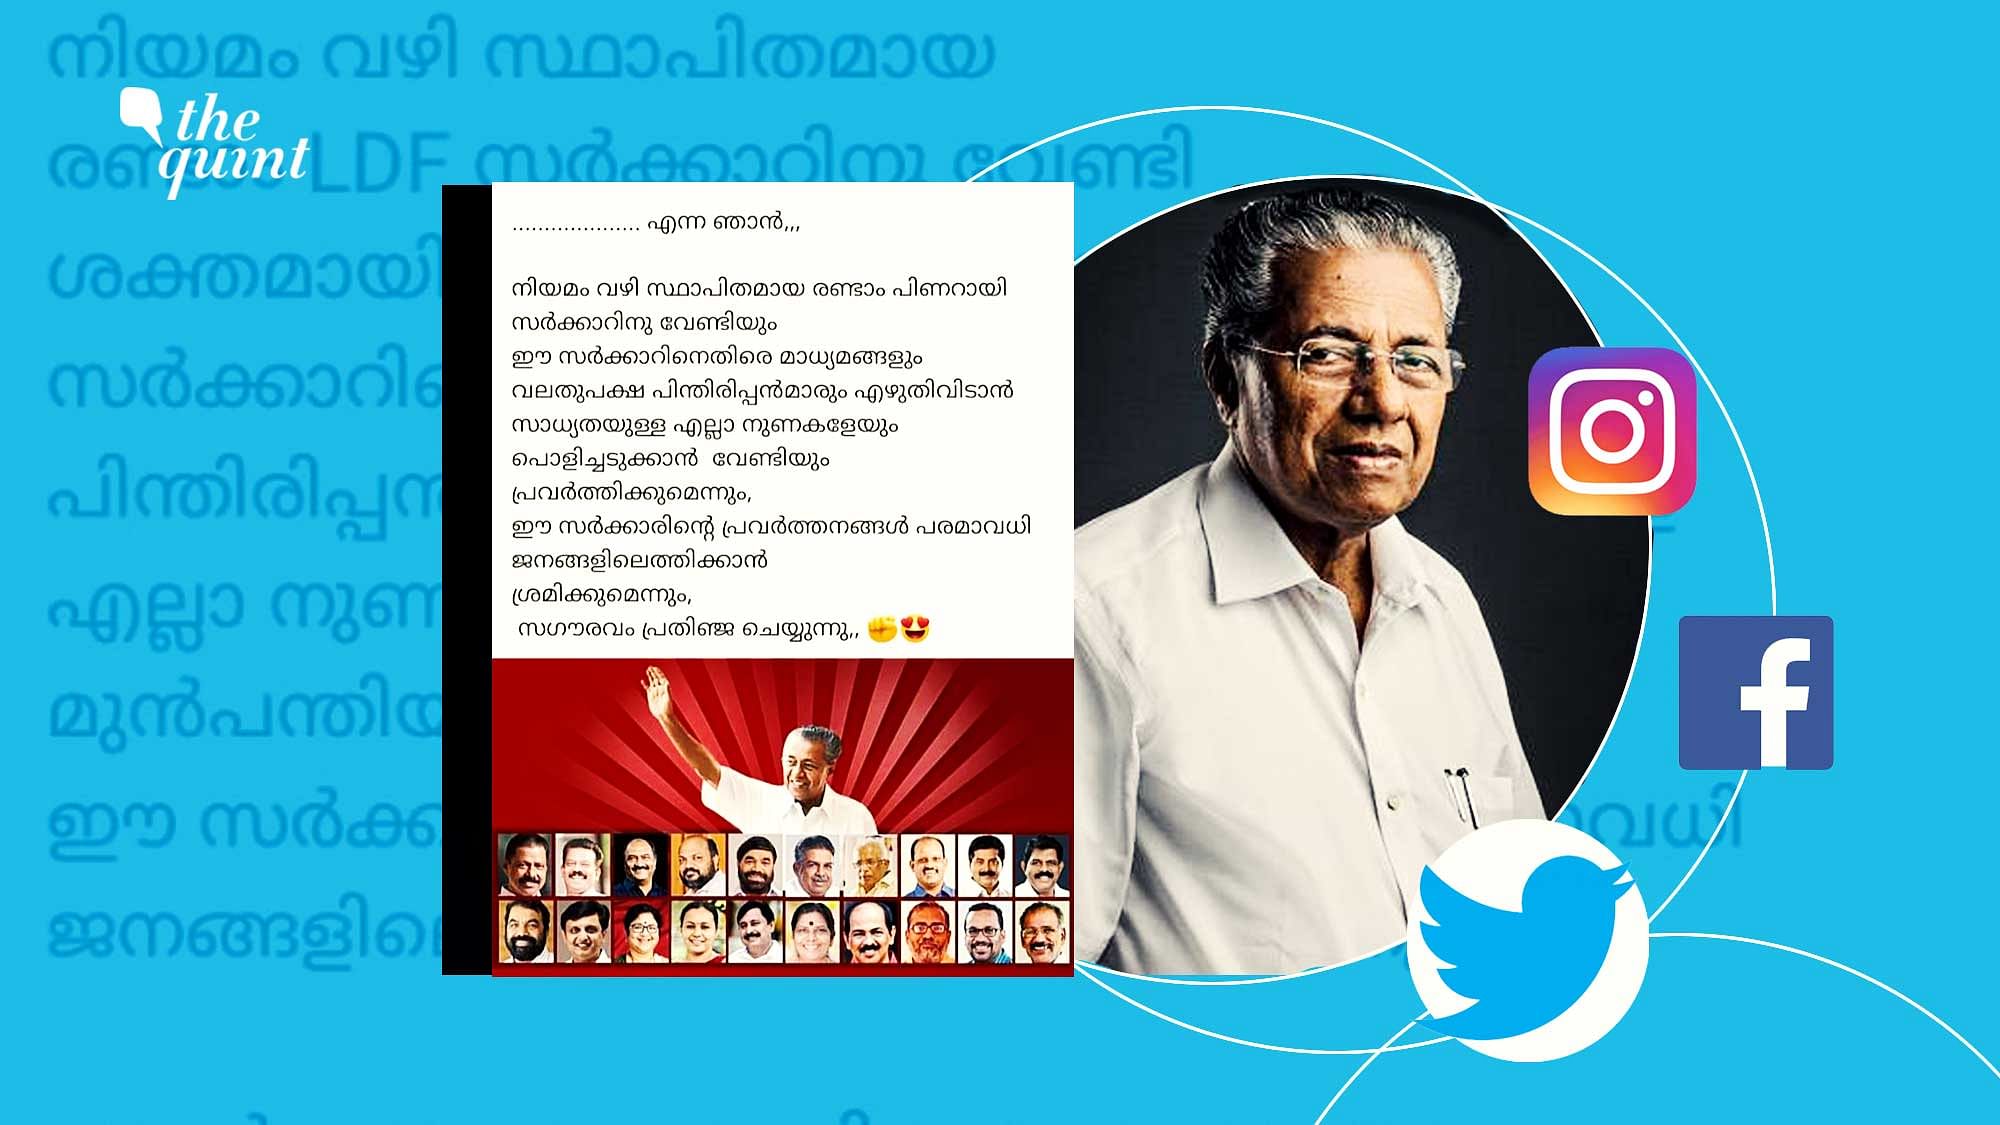 On 20 May, even as Pinarayi Vijayan took oath and became Kerala’s Chief Minister for the second consecutive term, several other ‘government supporters’ took oath on social media saying ‘they will defend the government’.